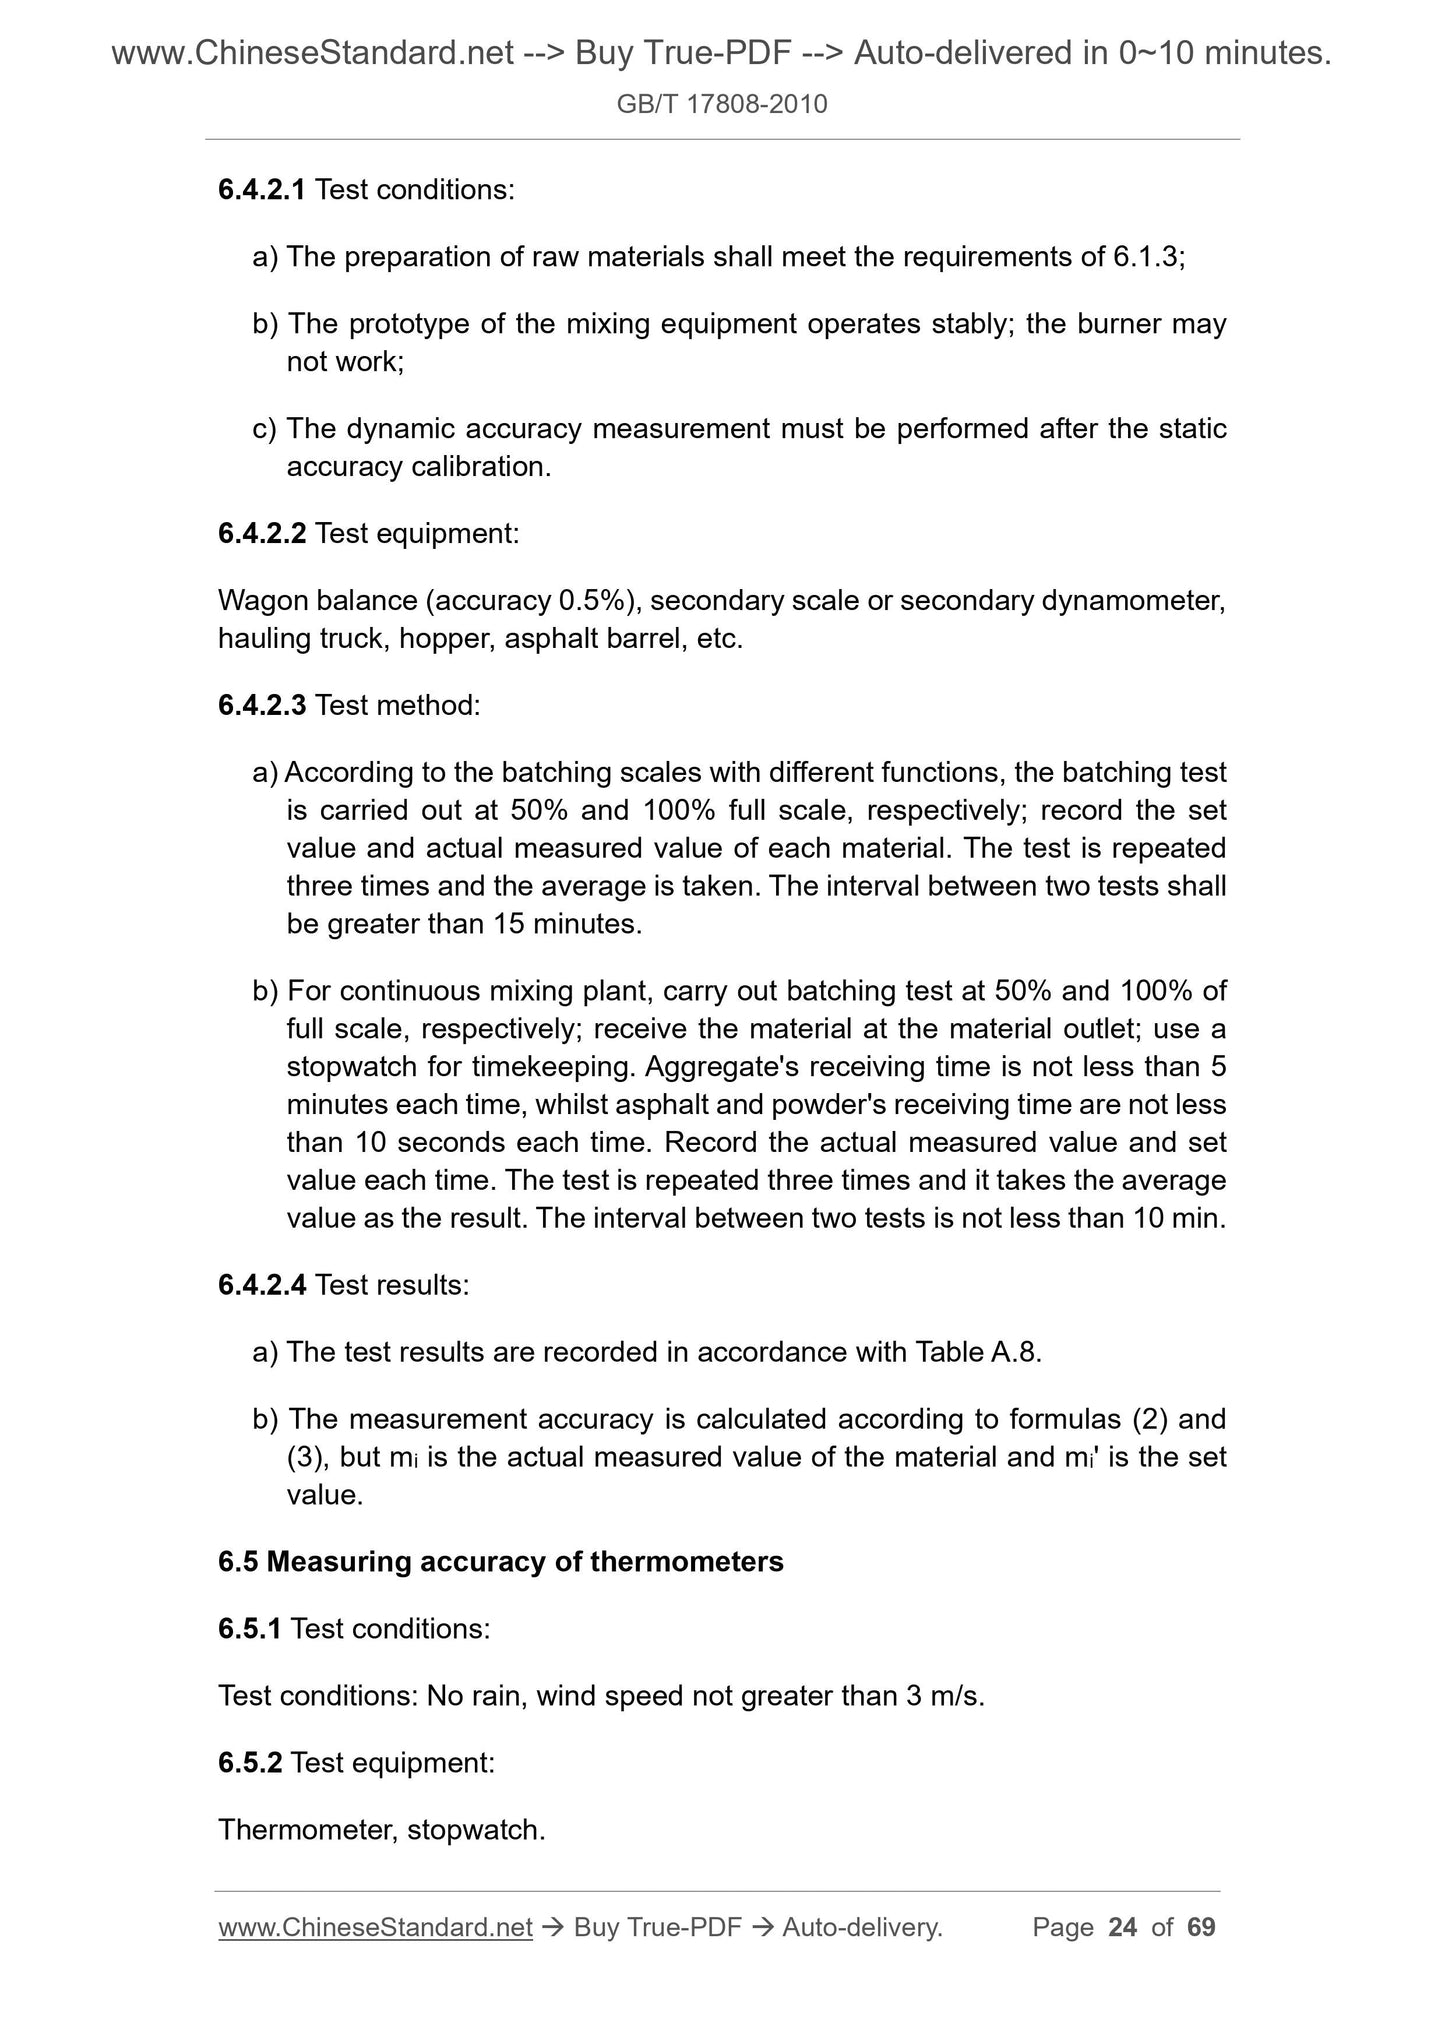 GB/T 17808-2010 Page 11